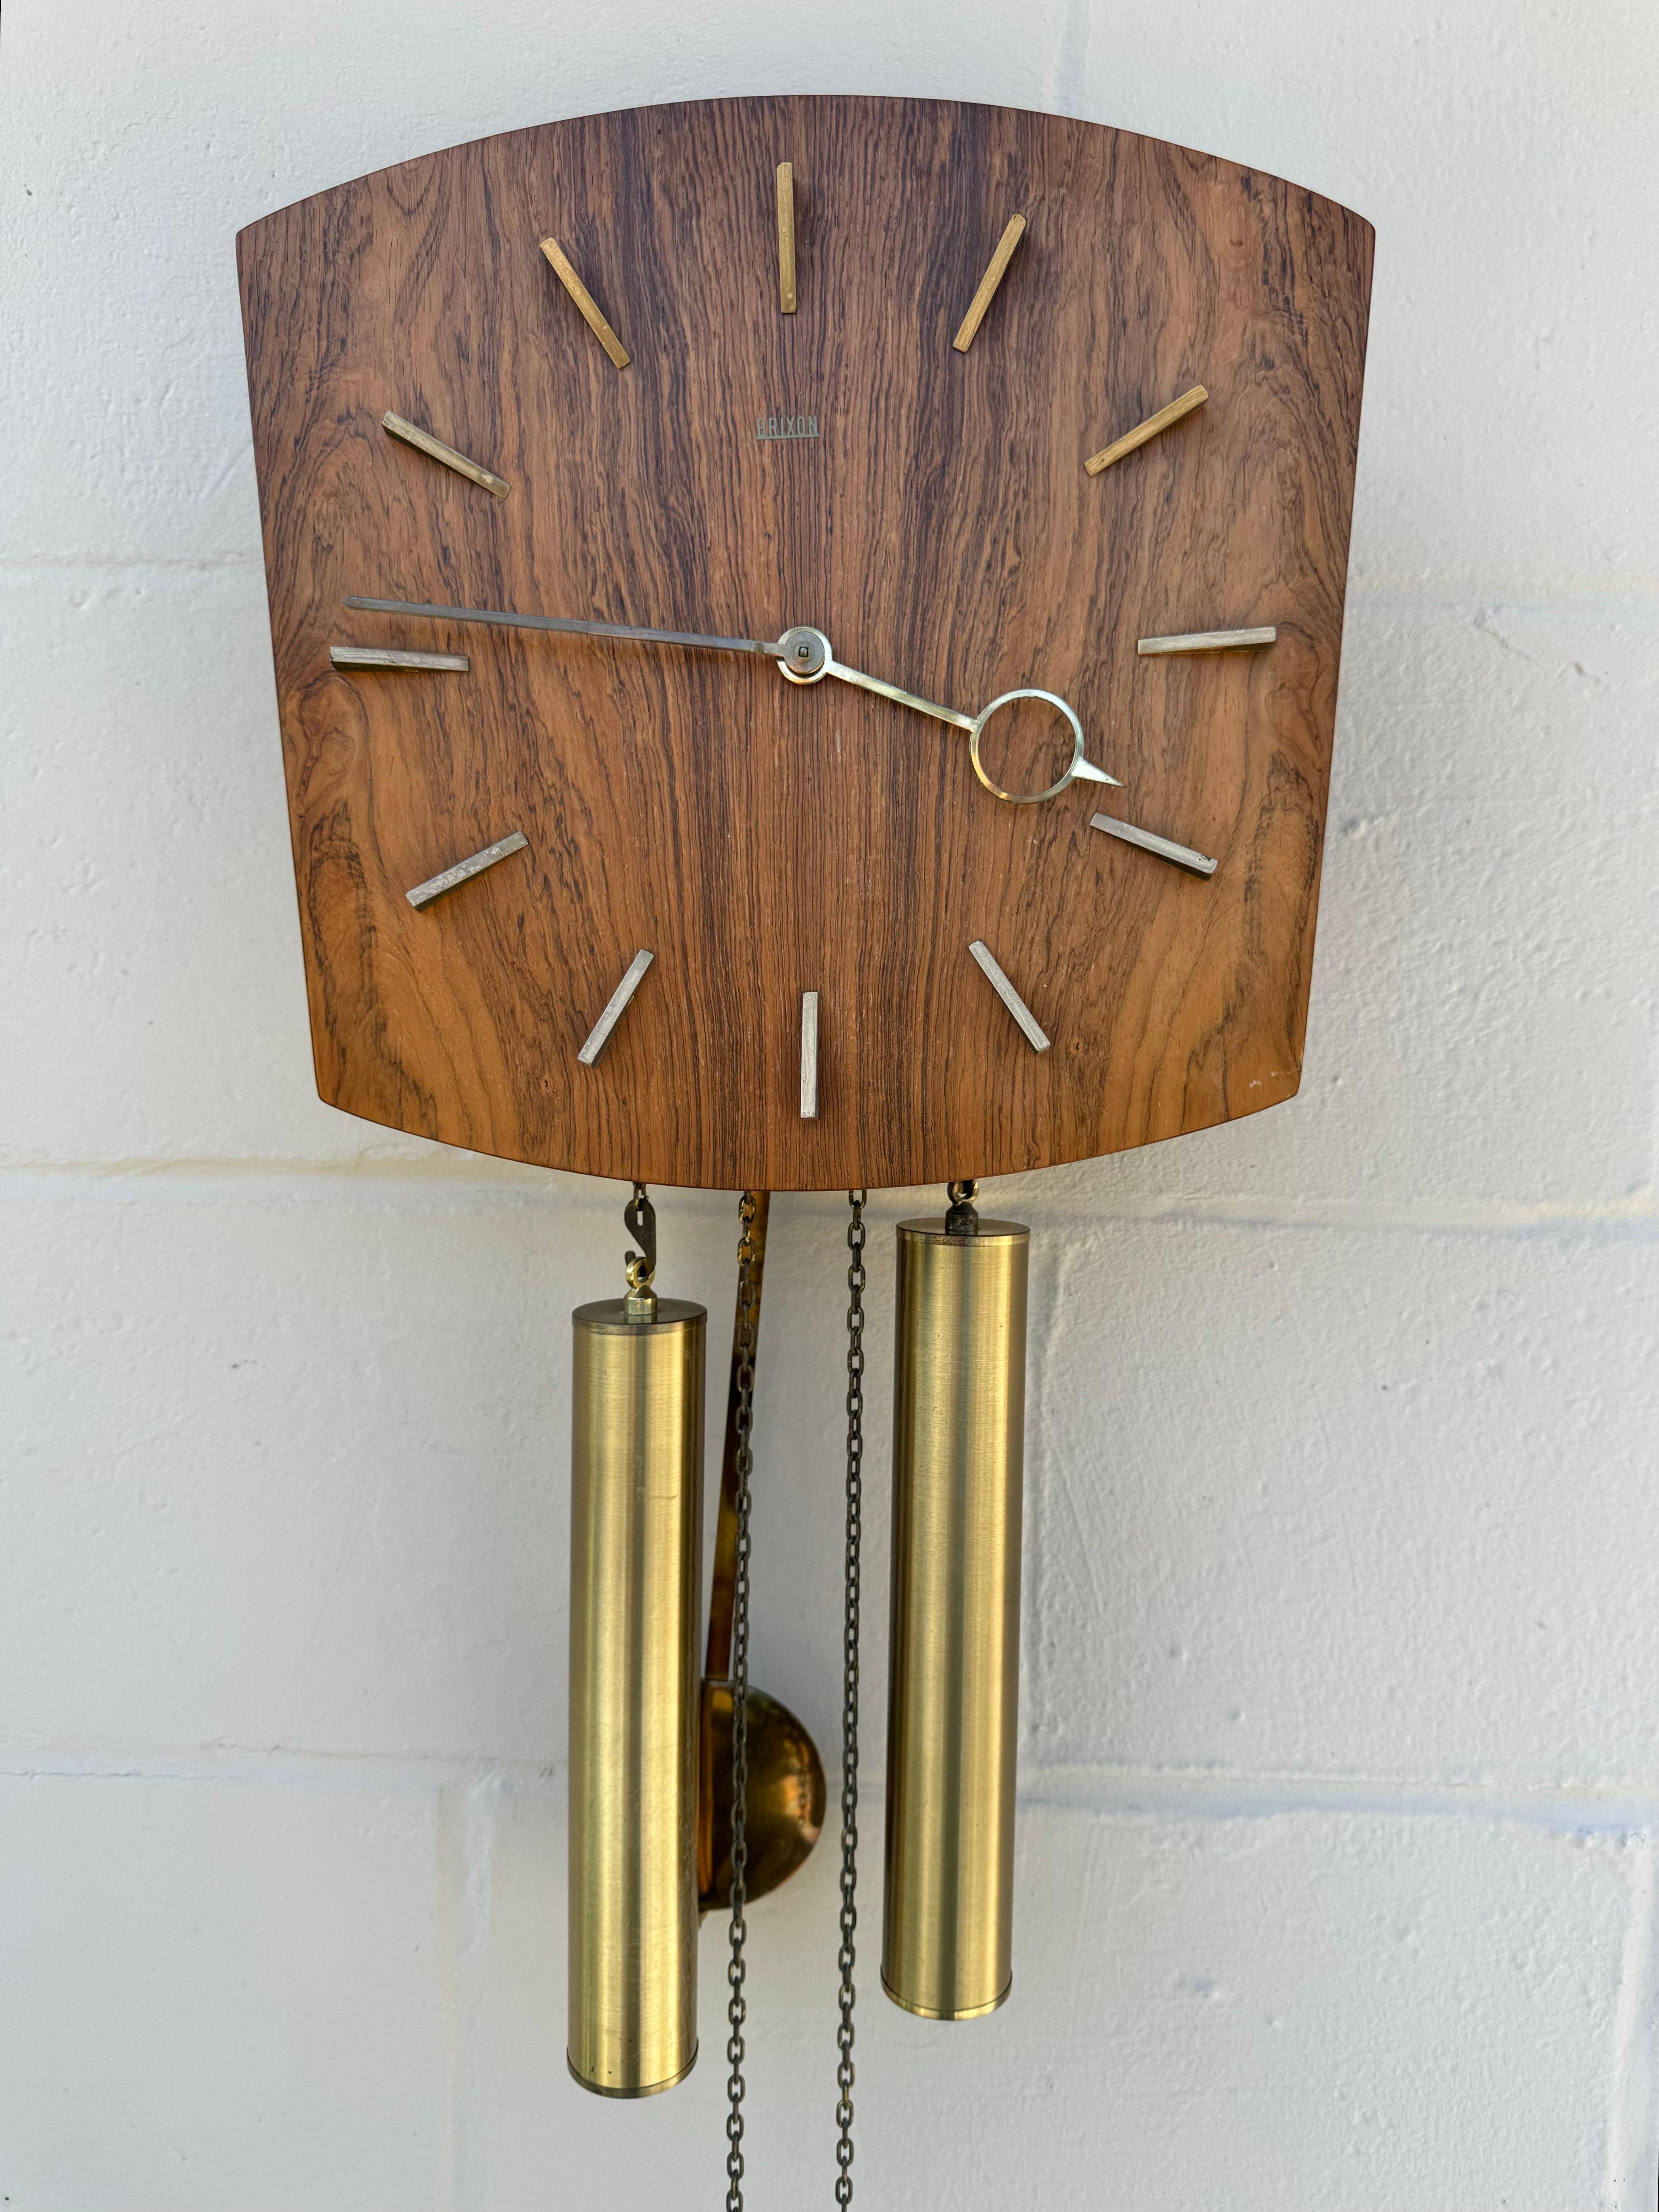 🕰️ Elevate Your Space with Vintage Elegance! 🕰️

Discover the Timeless Charm of Danish Mid-Century Modern Design!

Introducing our stunning Danish mid-century modern vintage teak wall clock, crafted with precision and style by Brixon in Denmark.